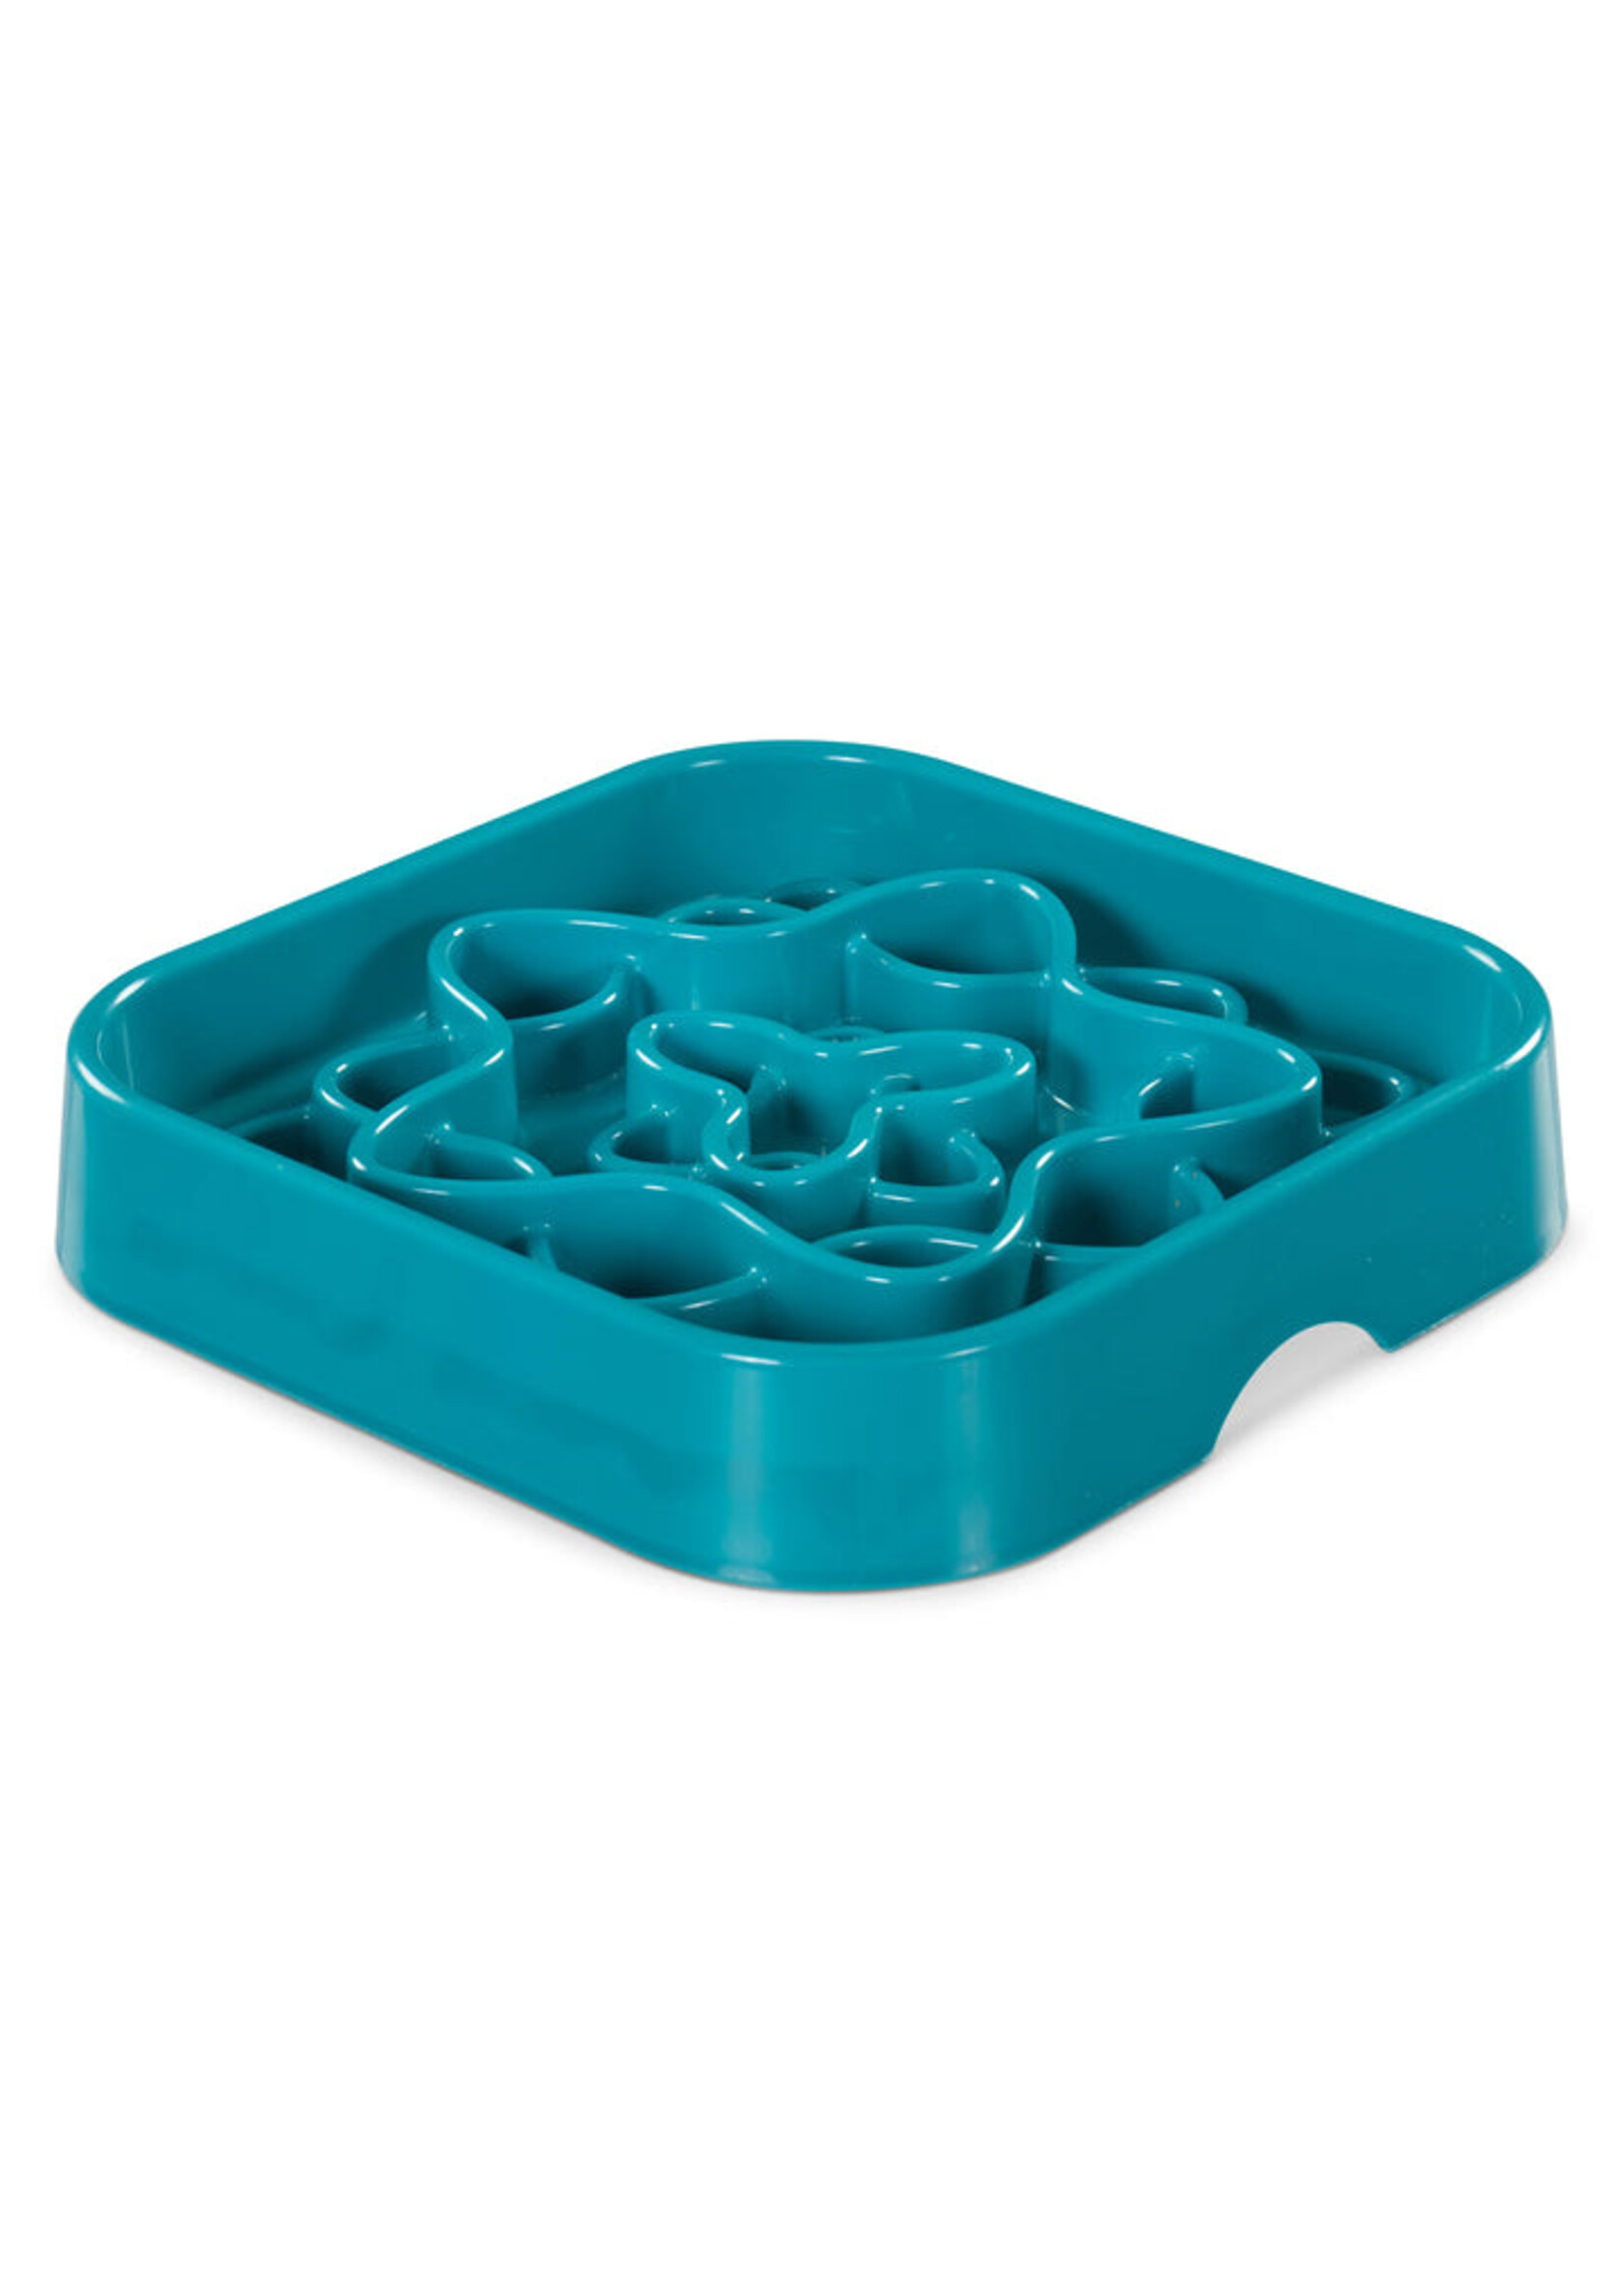 Messy Mutts Messy Mutts Interactive Square Slow Feeder